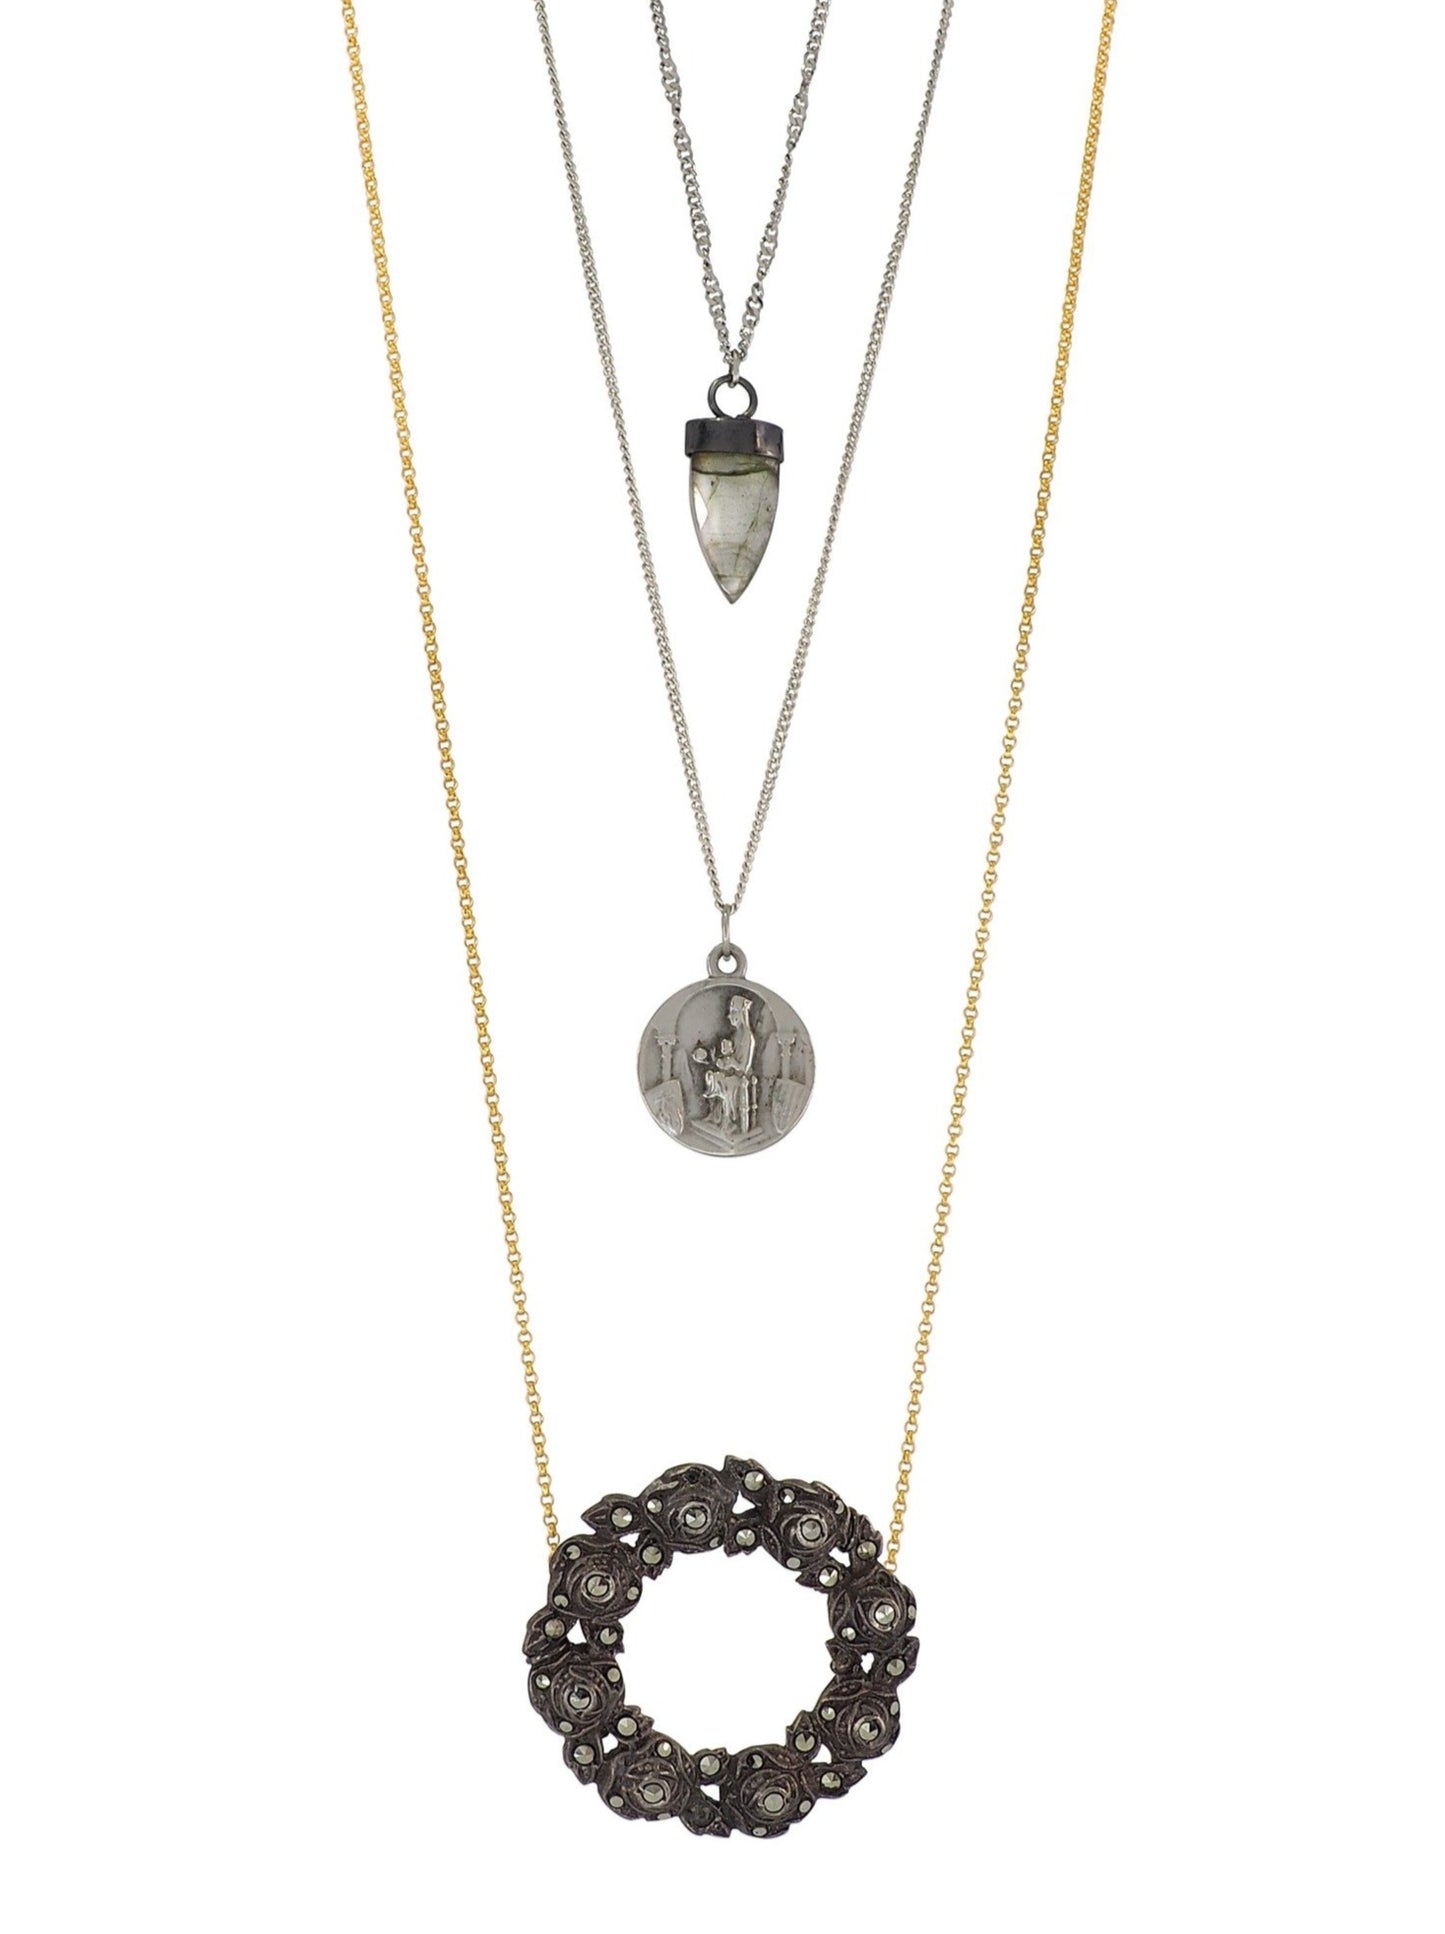 Three layered Gold and Silver plated Necklace feat. a gorgeous Crystal incrusted Antique Roses Lei, an antique holy Montserrat and baby Jesus from Barcelona and a Labradorite Crystal set in Oxidized Silver